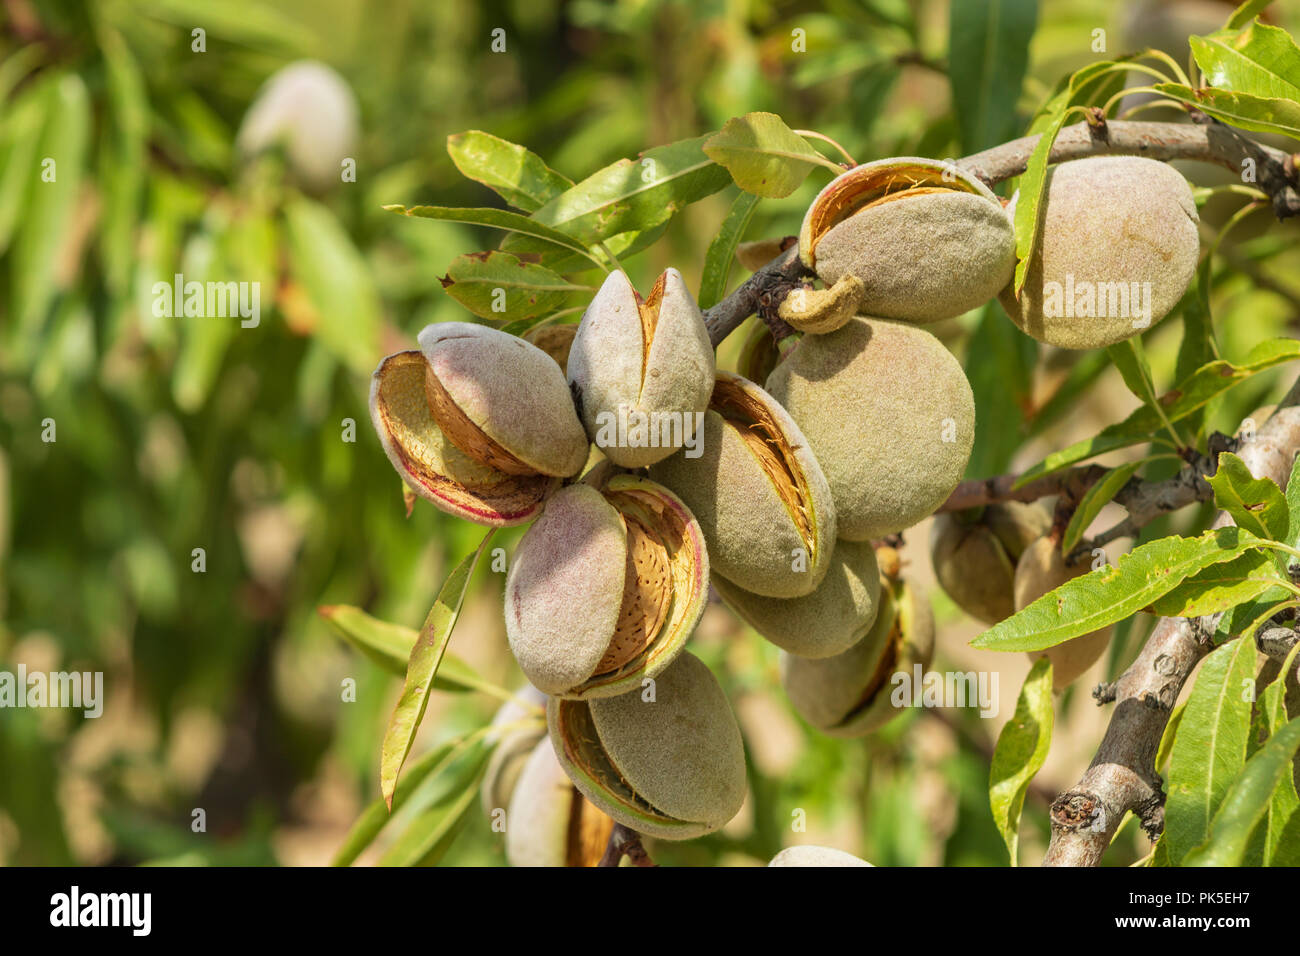 Prunus dulcis, Almond Tree with almond nuts ready for harvesting, Andalusia Spain Stock Photo